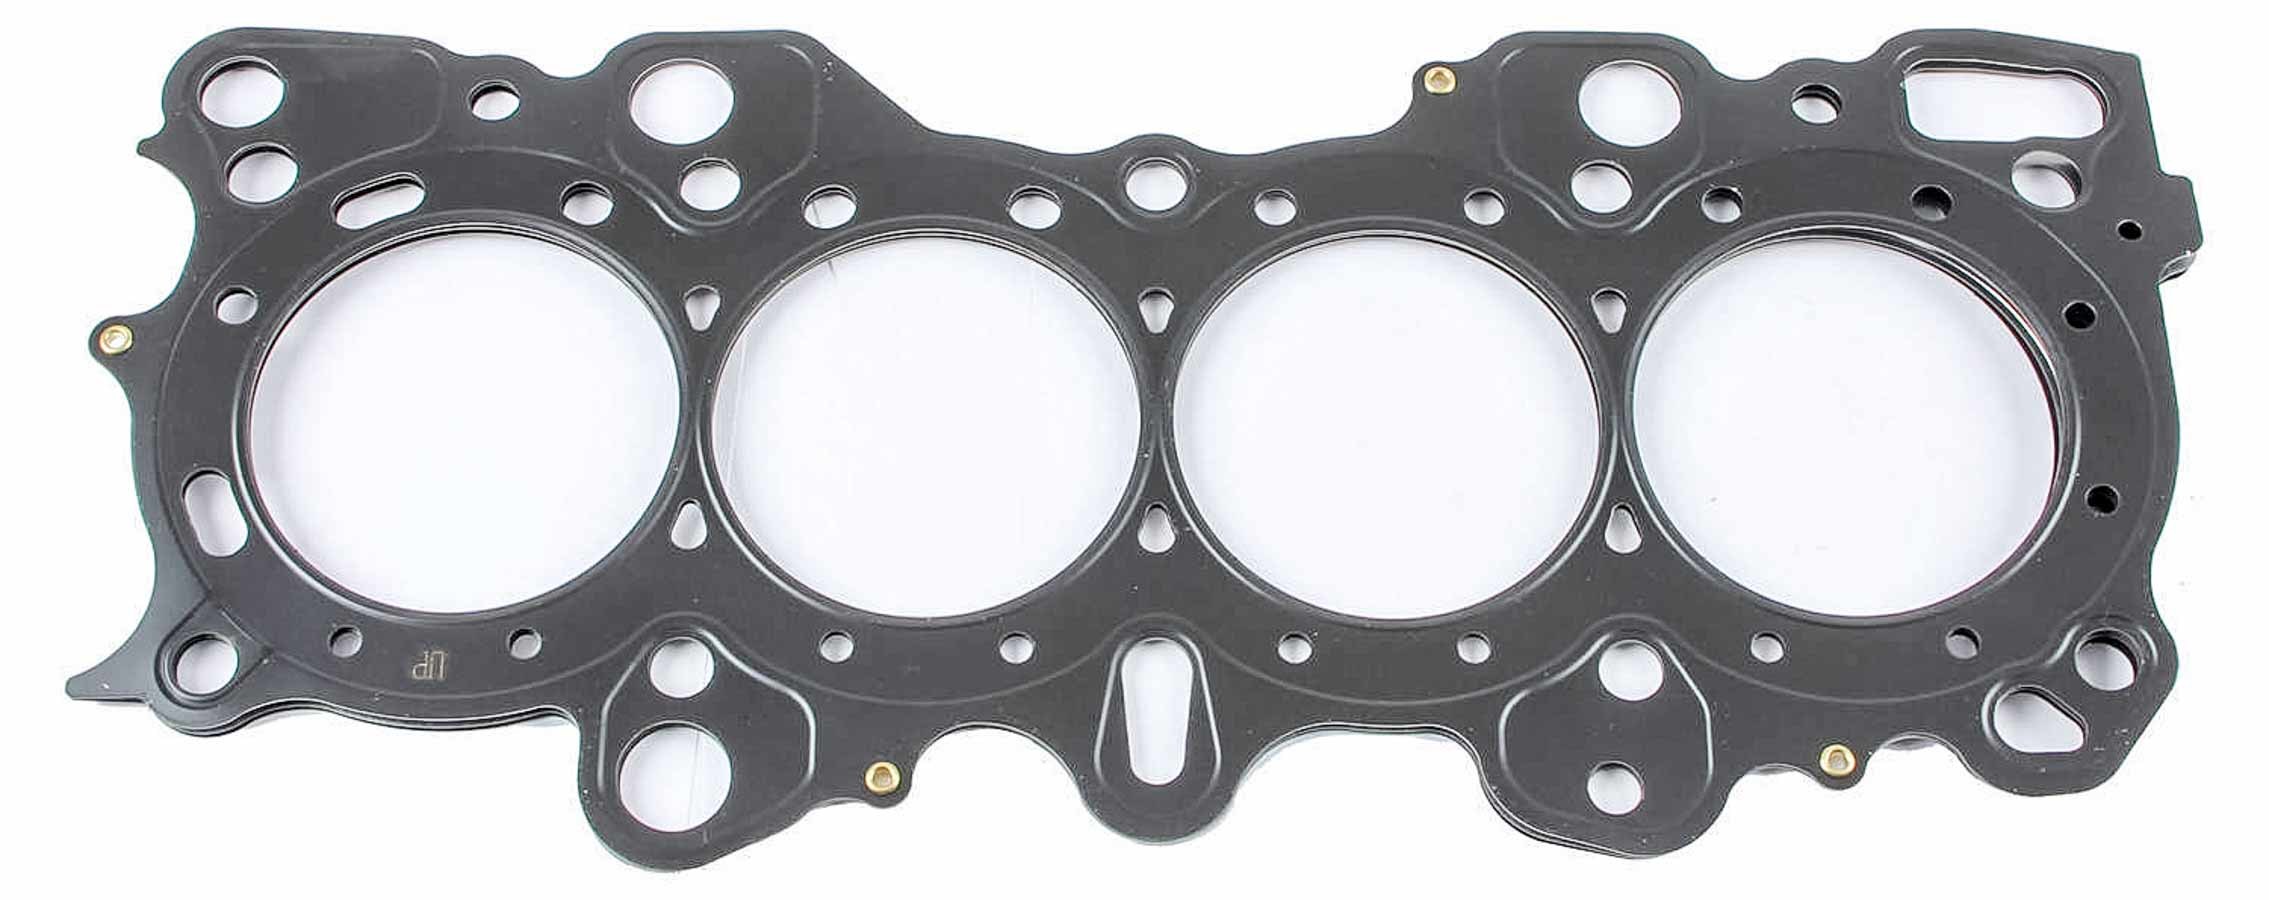 Cometic Gaskets C4189-030 Cylinder Head Gasket, 83.0 mm Bore, 0.030 in Compression Thickness, Multi-Layer Steel, Honda B-Series, Each